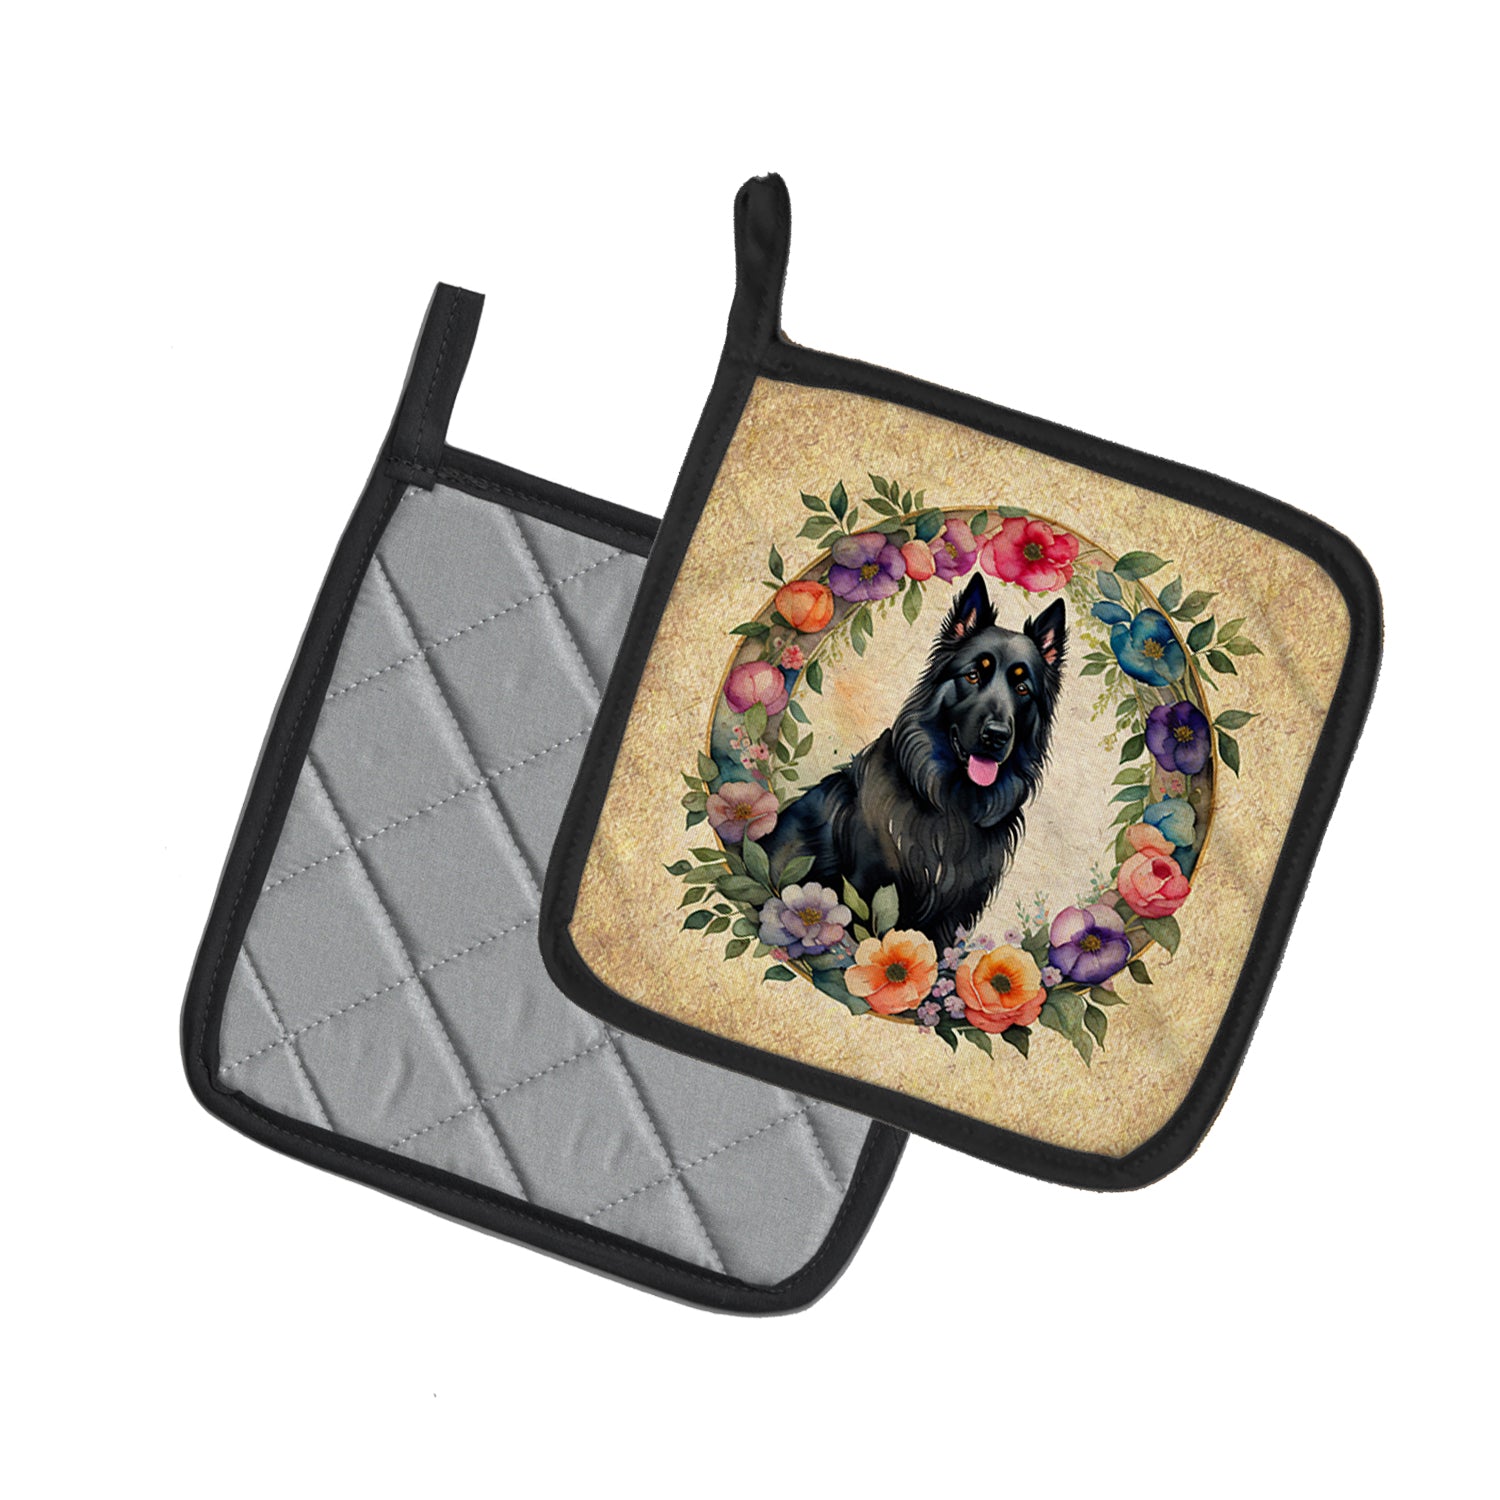 Buy this Belgian Sheepdog and Flowers Pair of Pot Holders